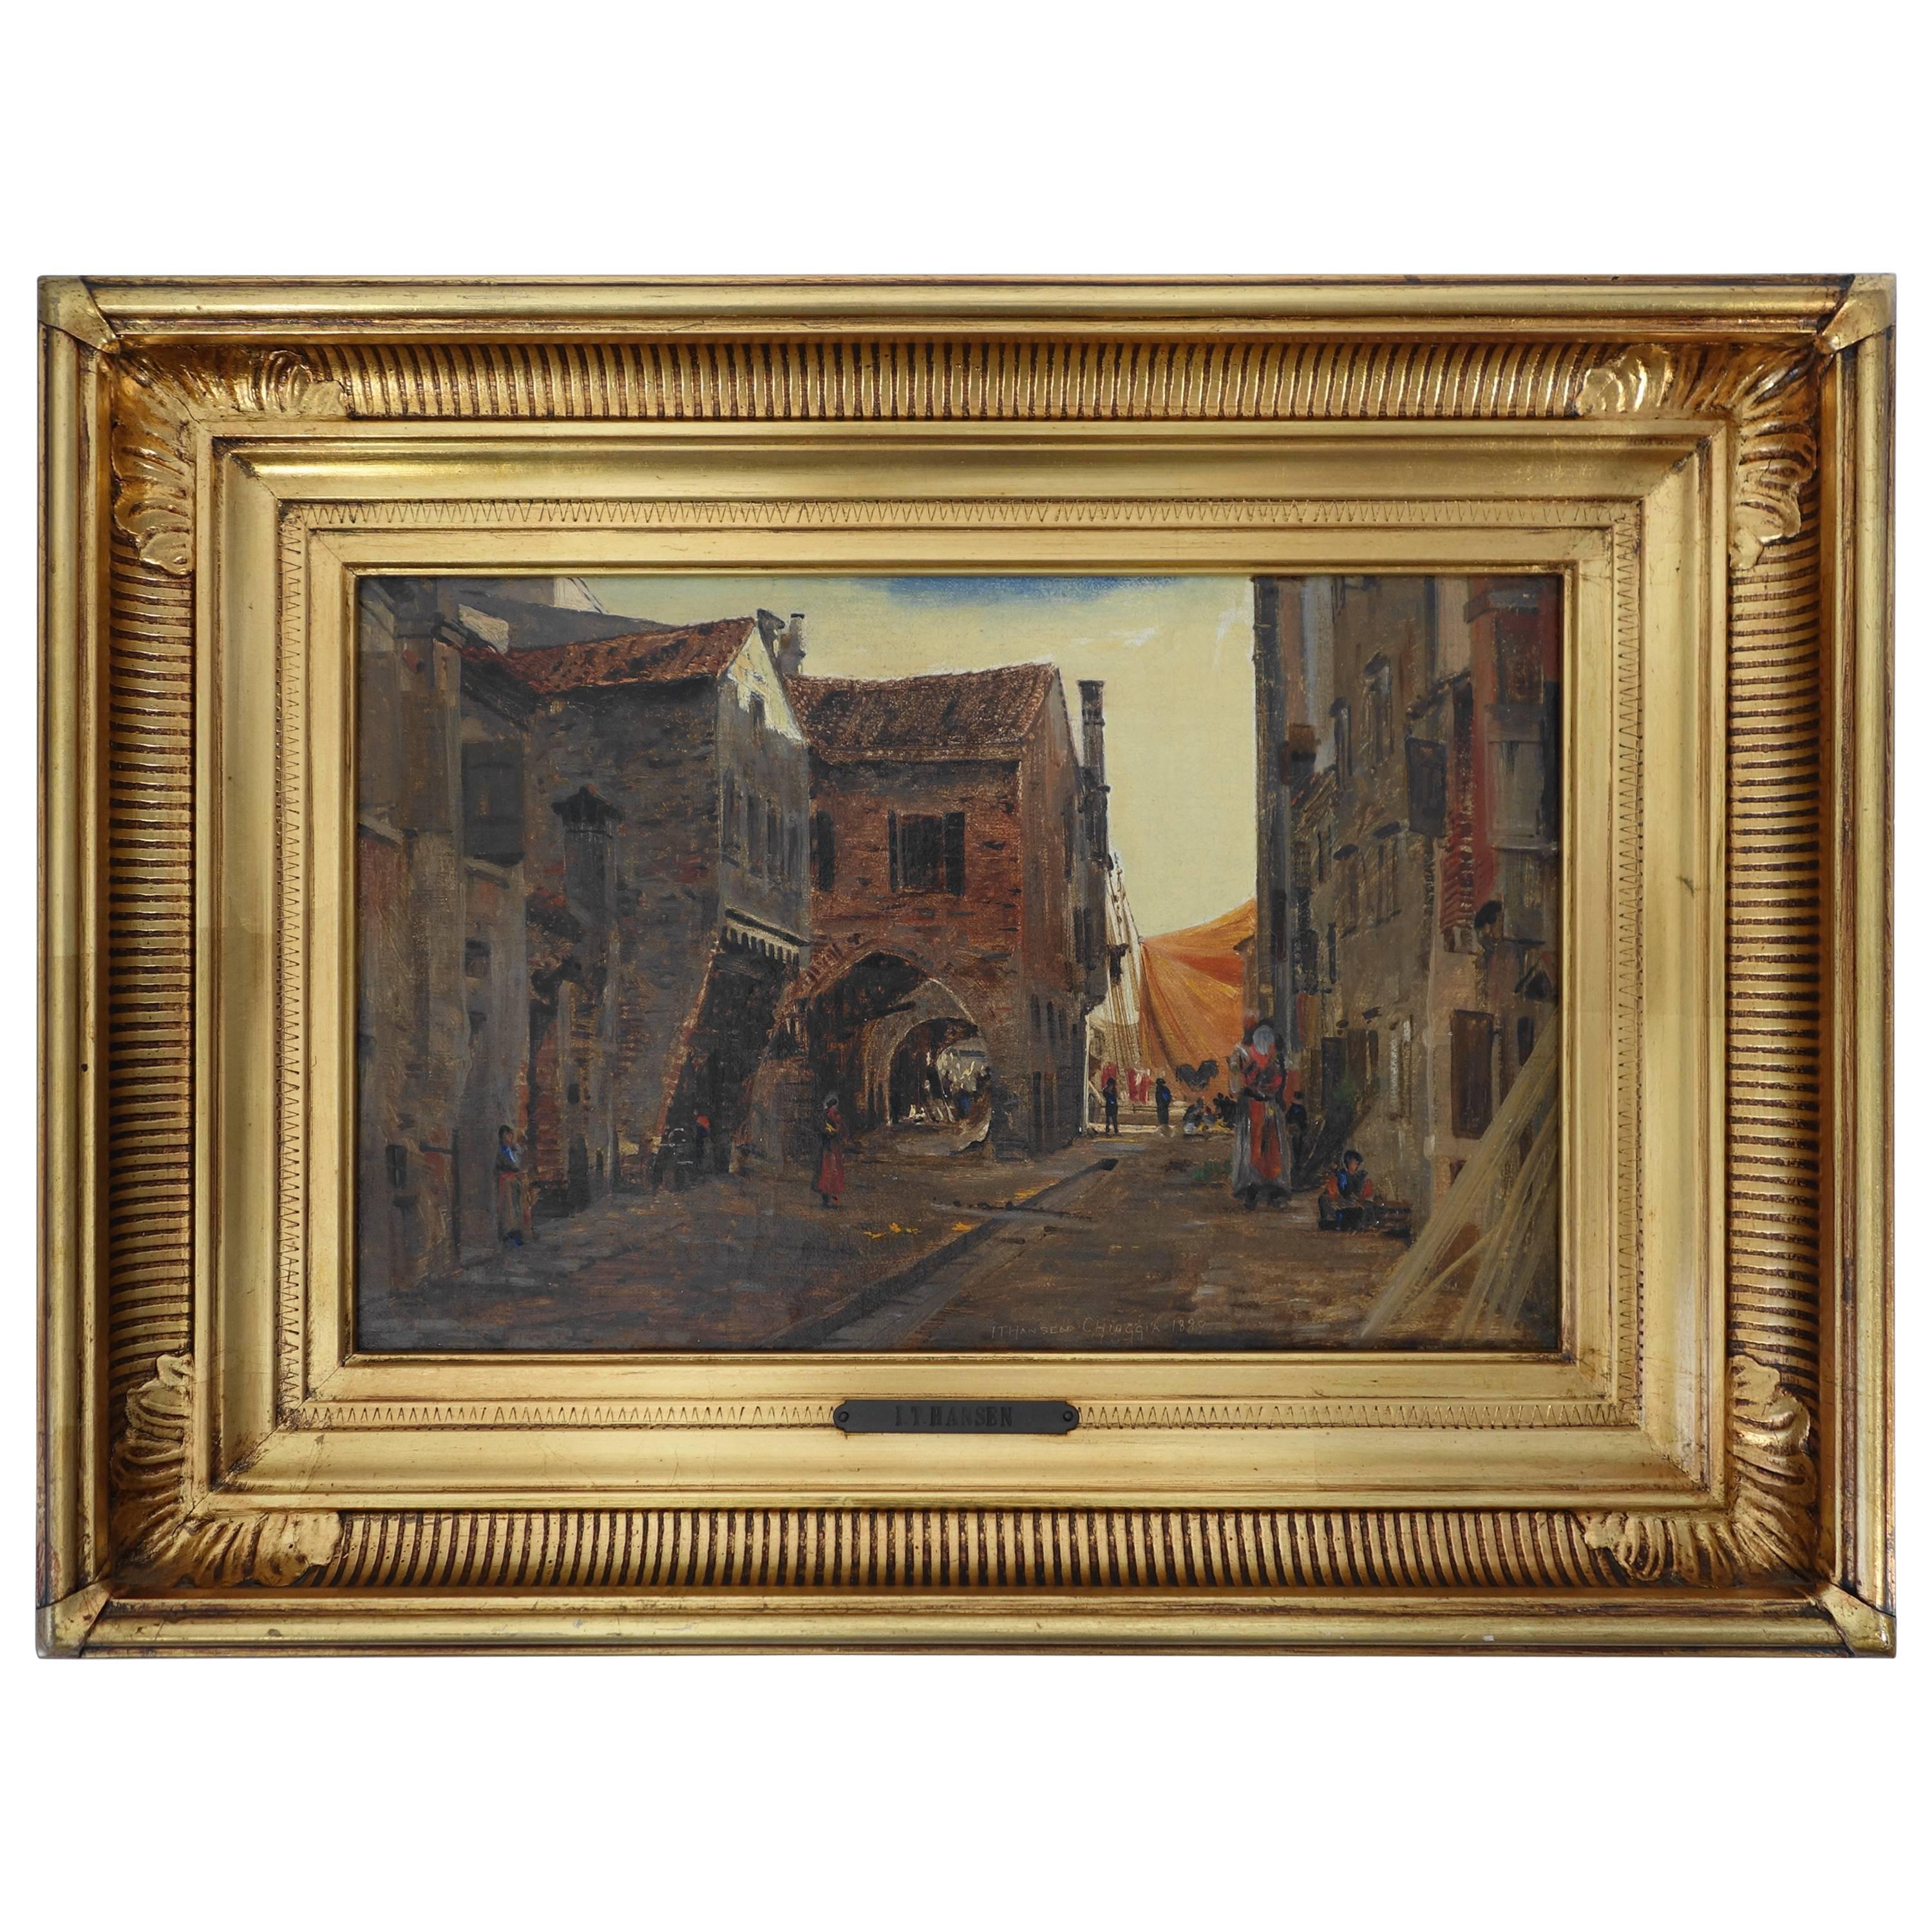 I.T. Hansen, Oil Painting, Street in Chioggia by Venice, Italy, 1889